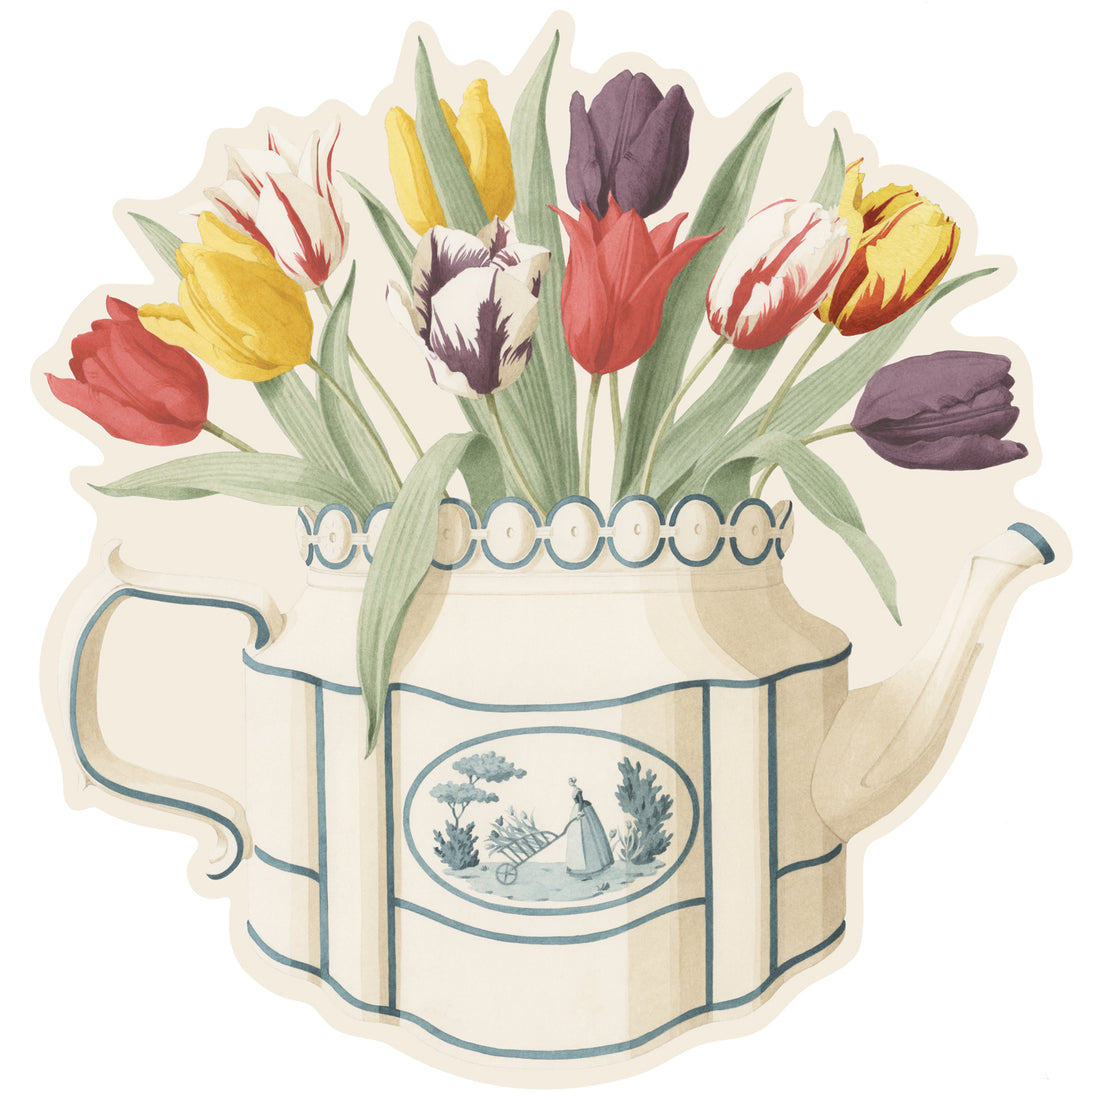 A die-cut illustration of a vintage, blue and white porcelain teapot full of vibrant tulip blooms in yellow, red and purple with green leaves.